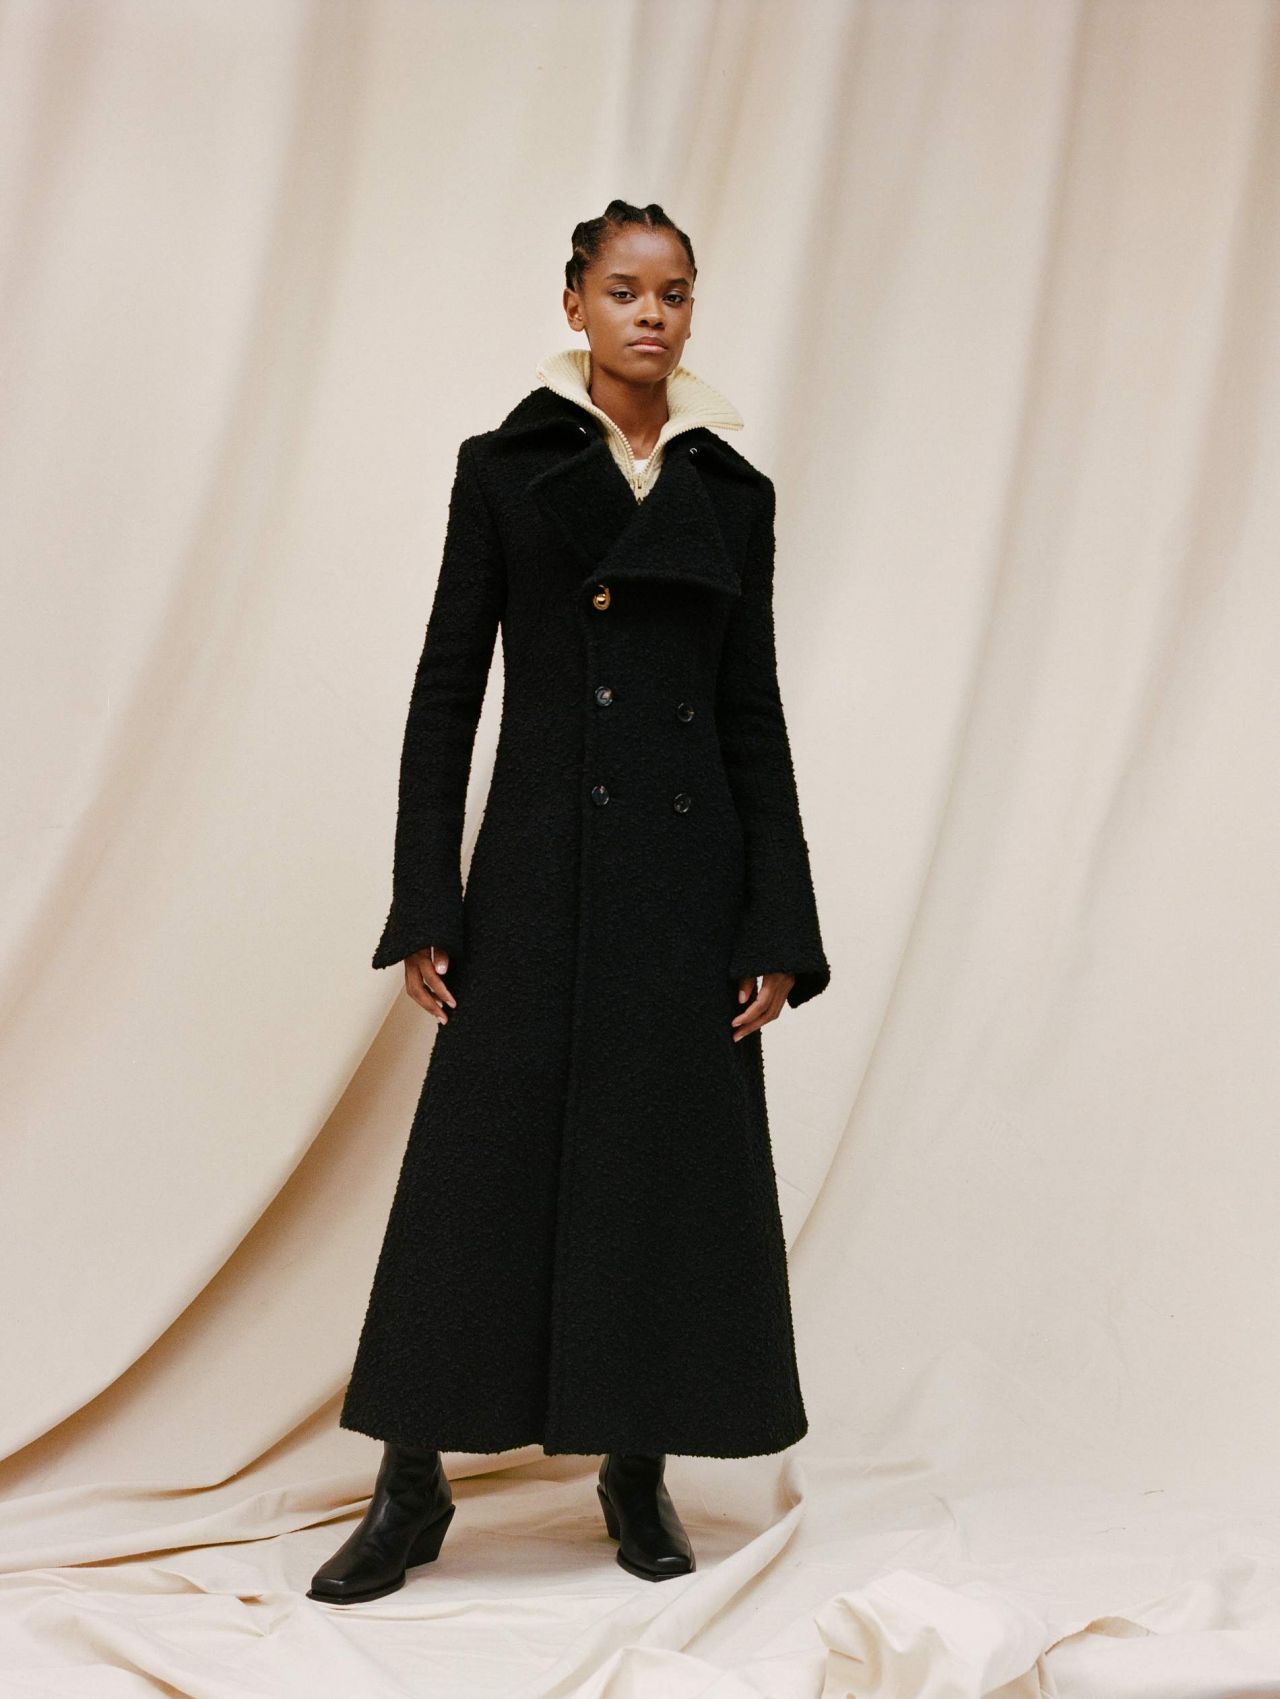 letitia-wright-the-edit-by-net-a-porter-october-2020-5.jpg